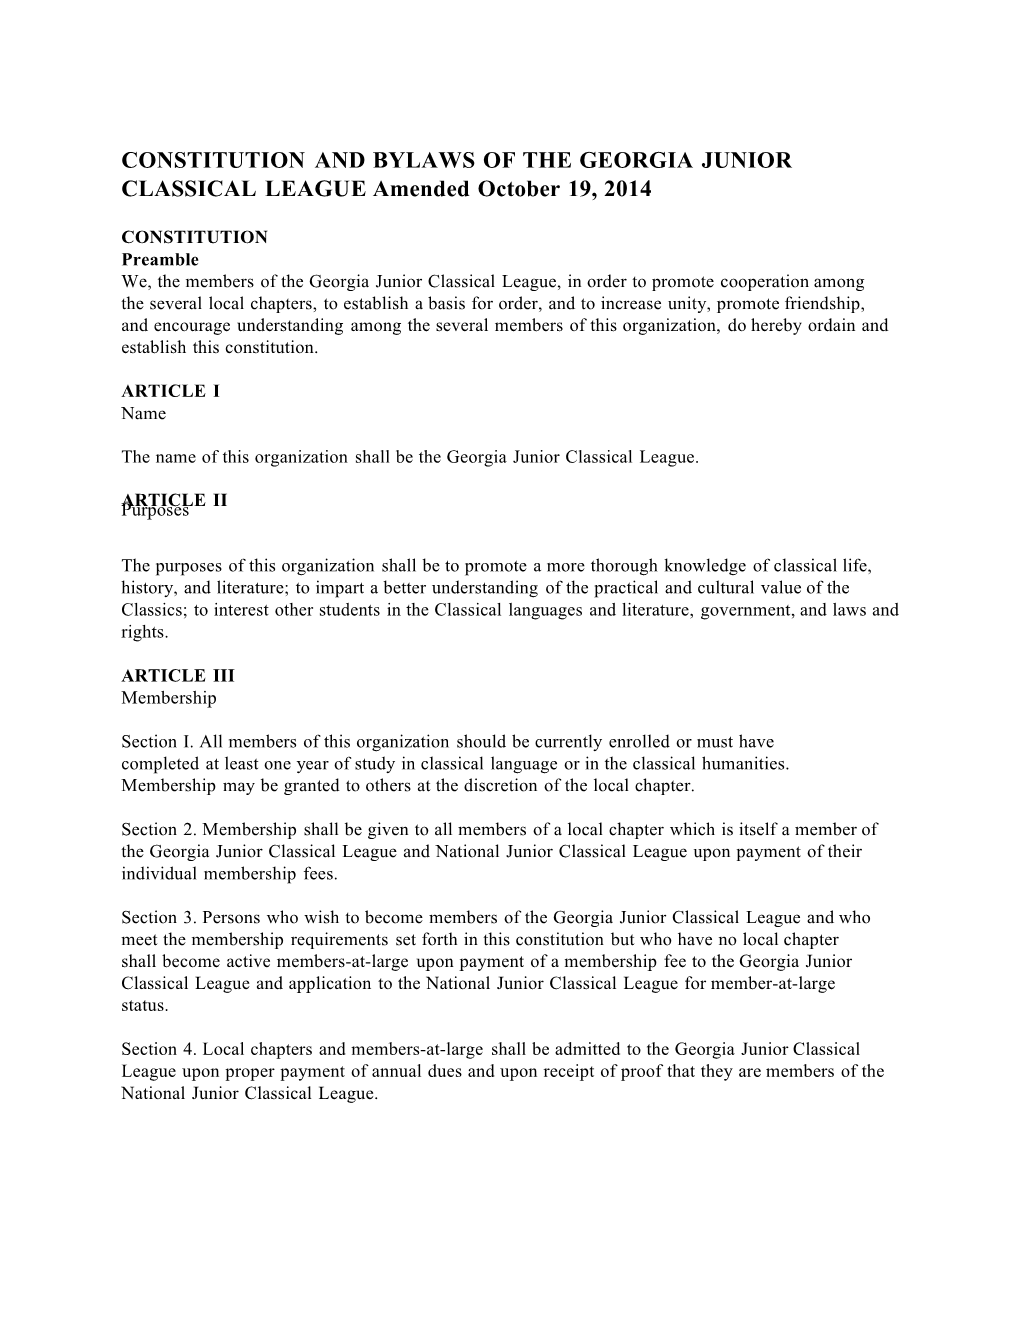 CONSTITUTION and BYLAWS of the GEORGIA JUNIOR CLASSICAL LEAGUE Amended October 19, 2014